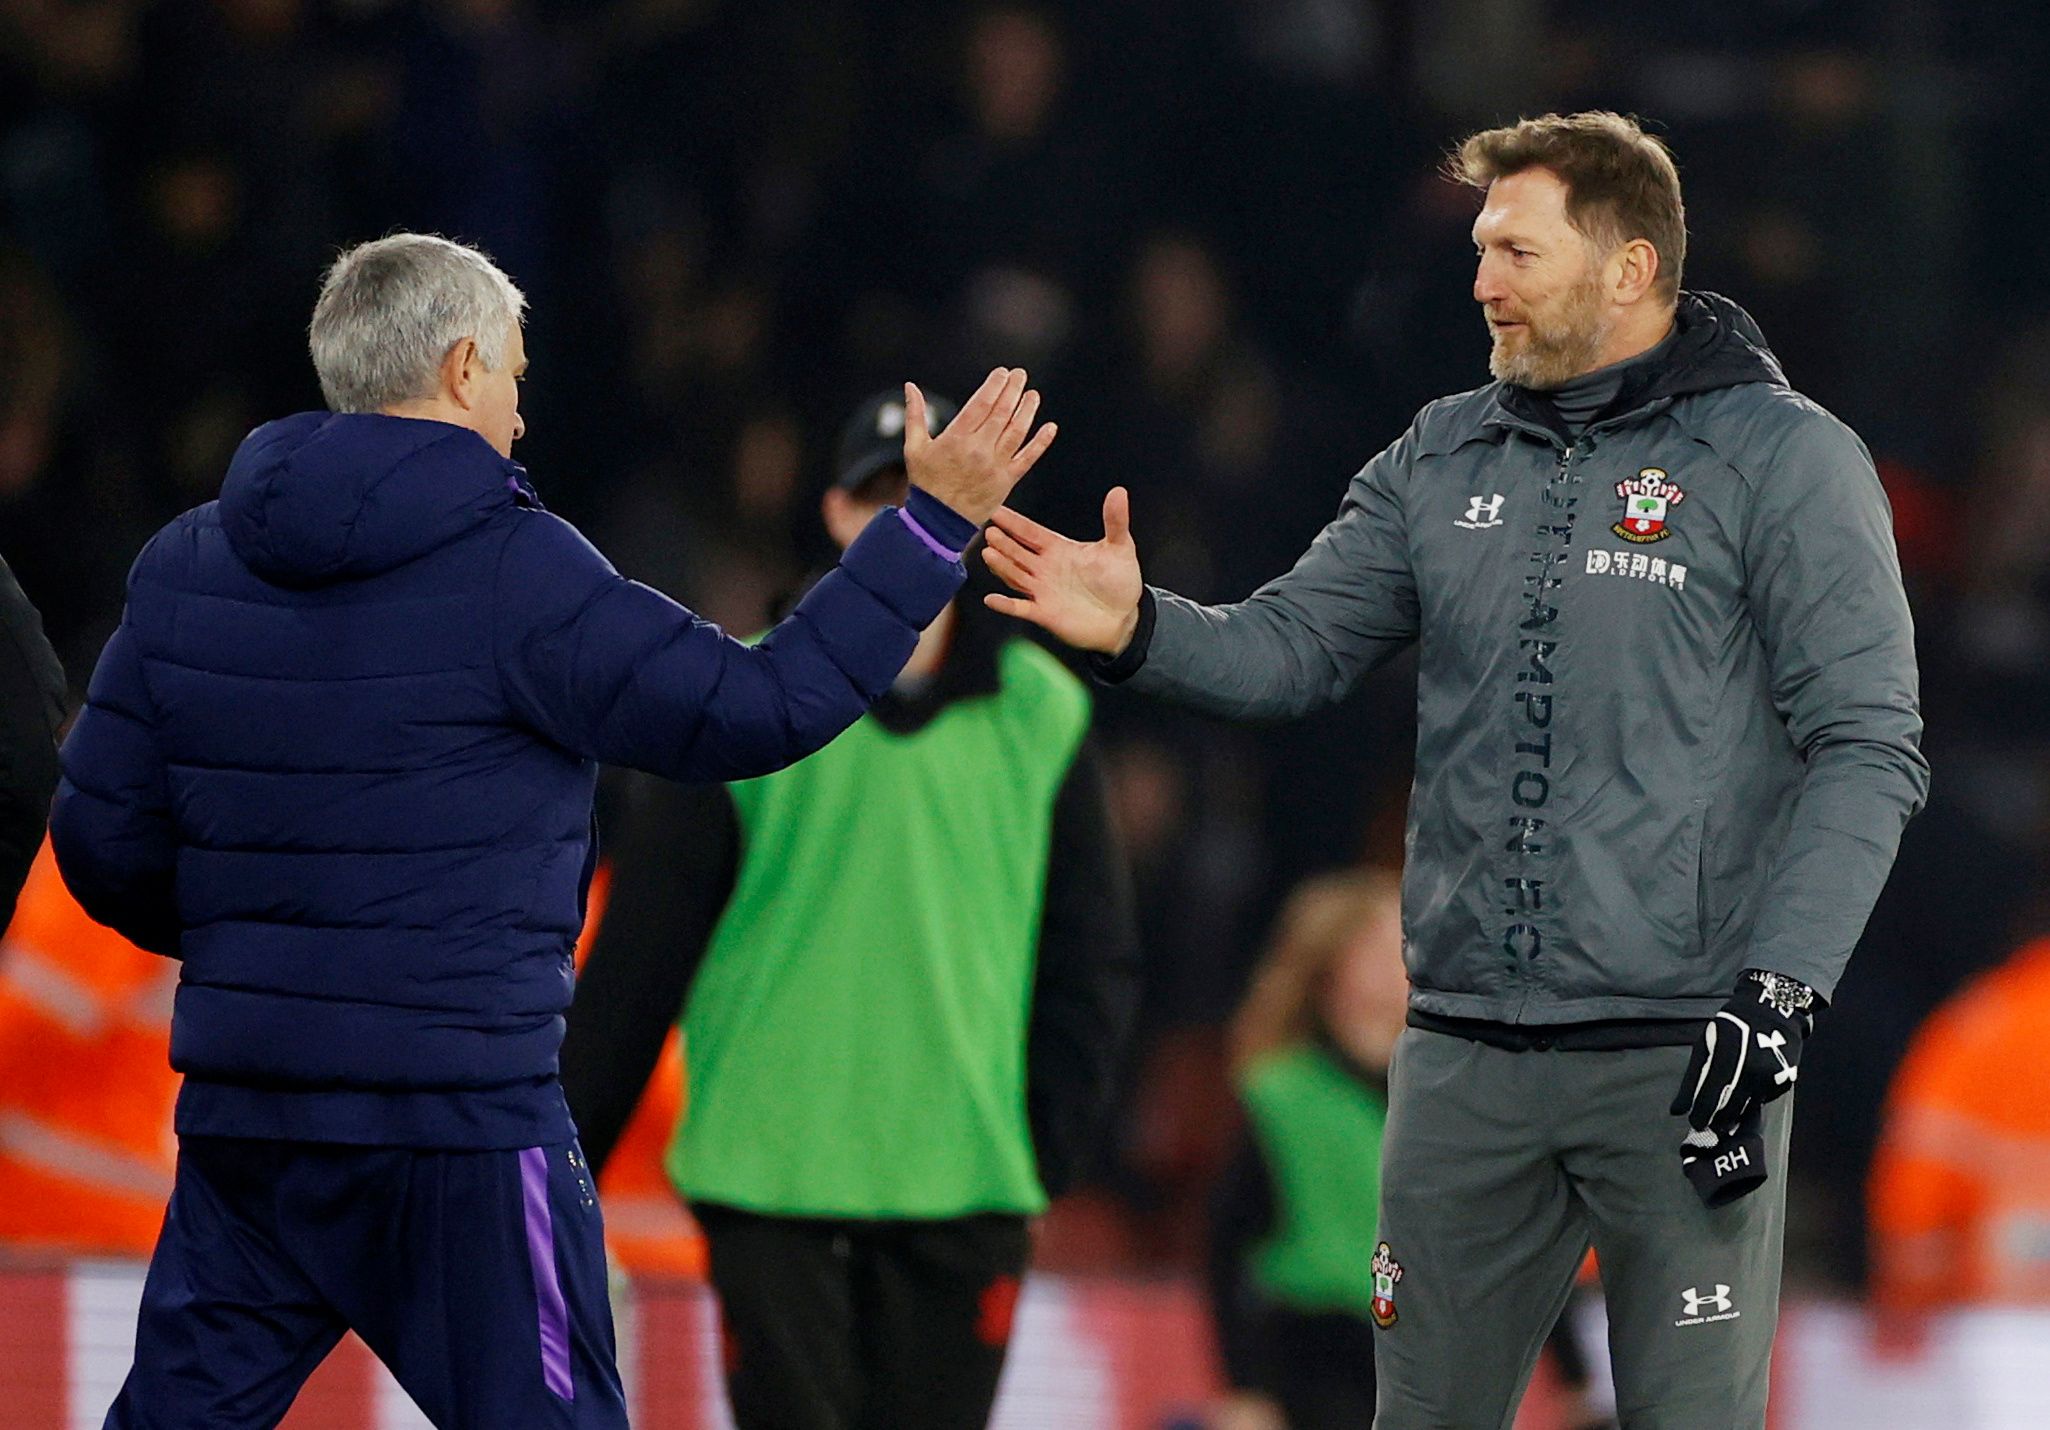 Soccer Football - FA Cup Fourth Round - Southampton v Tottenham Hotspur - St Mary's Stadium, Southampton, Britain - January 25, 2020  Tottenham Hotspur manager Jose Mourinho with Southampton manager Ralph Hasenhuttl after the match    Action Images via Reuters/John Sibley